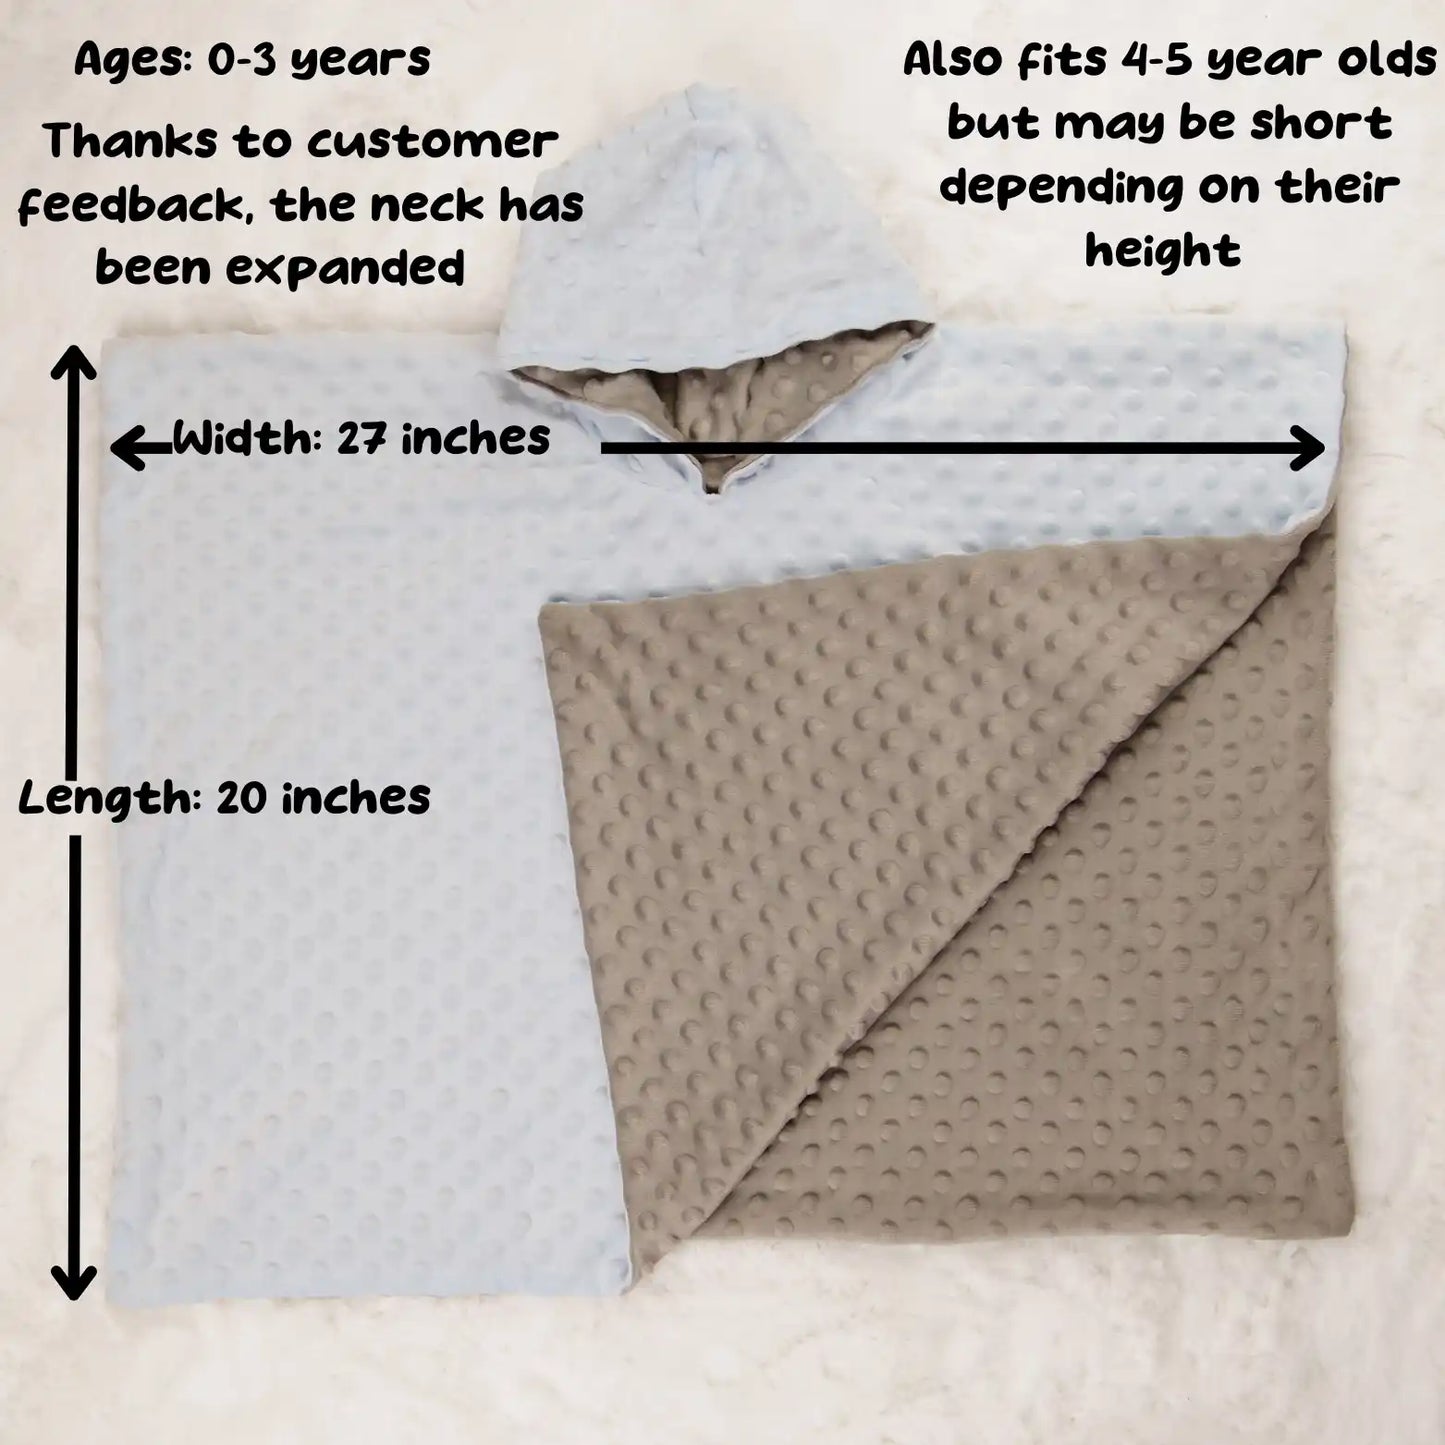 car seat poncho measurements blue: ages: 0-3 years, width 27 inches, length 20 inches